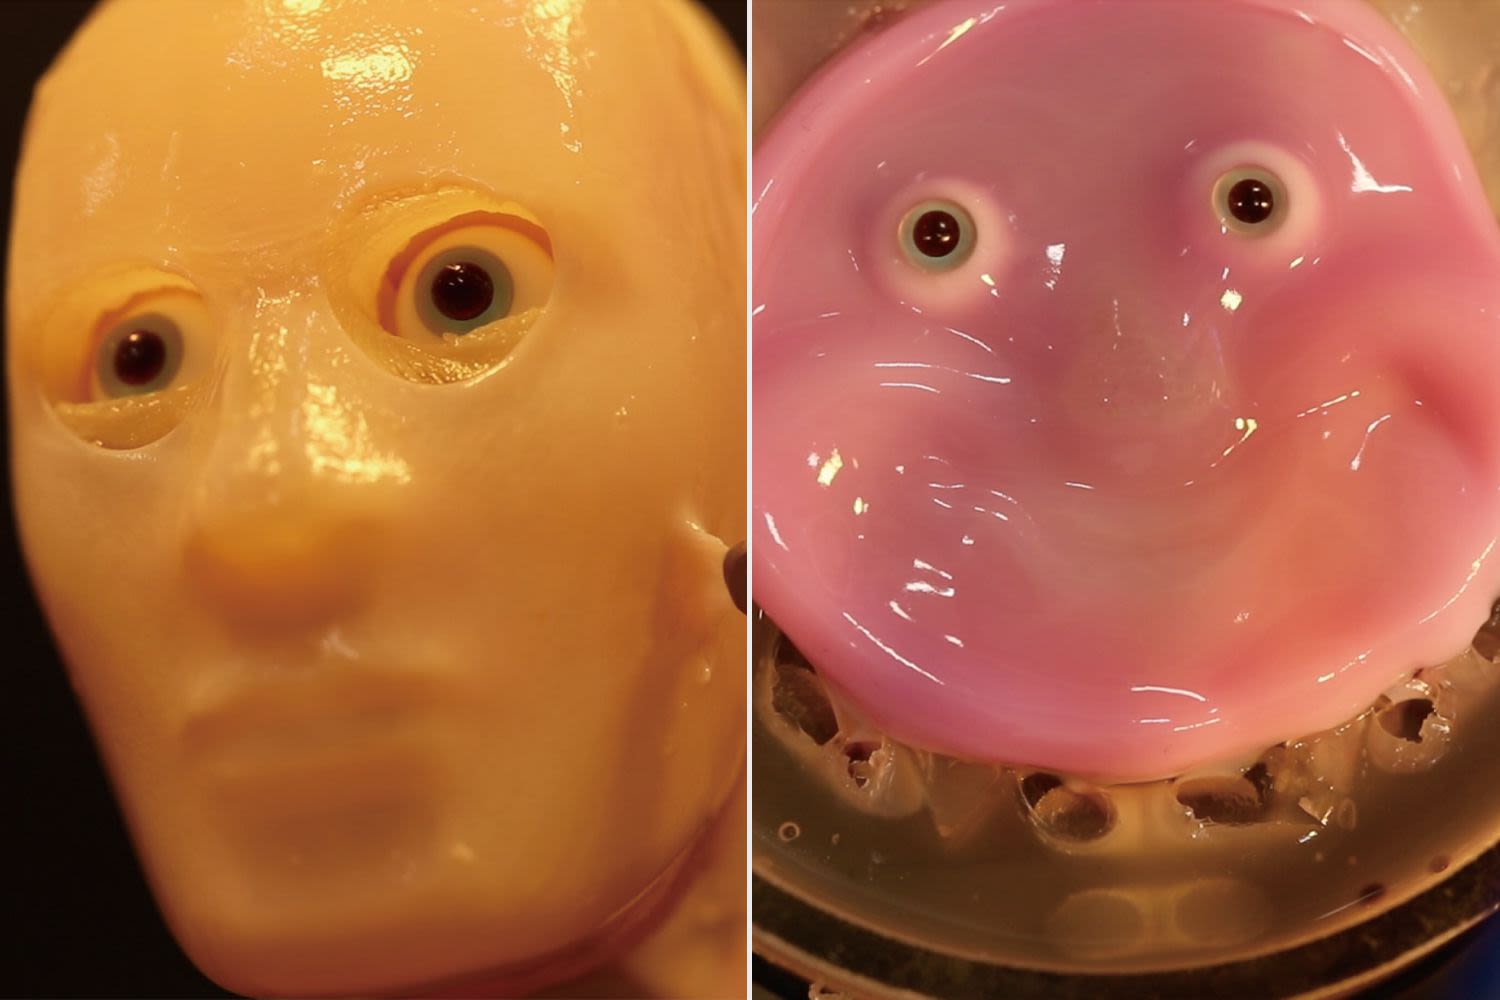 Japanese Scientists Create Smiling Robot with 'Living' Skin Using Collagen